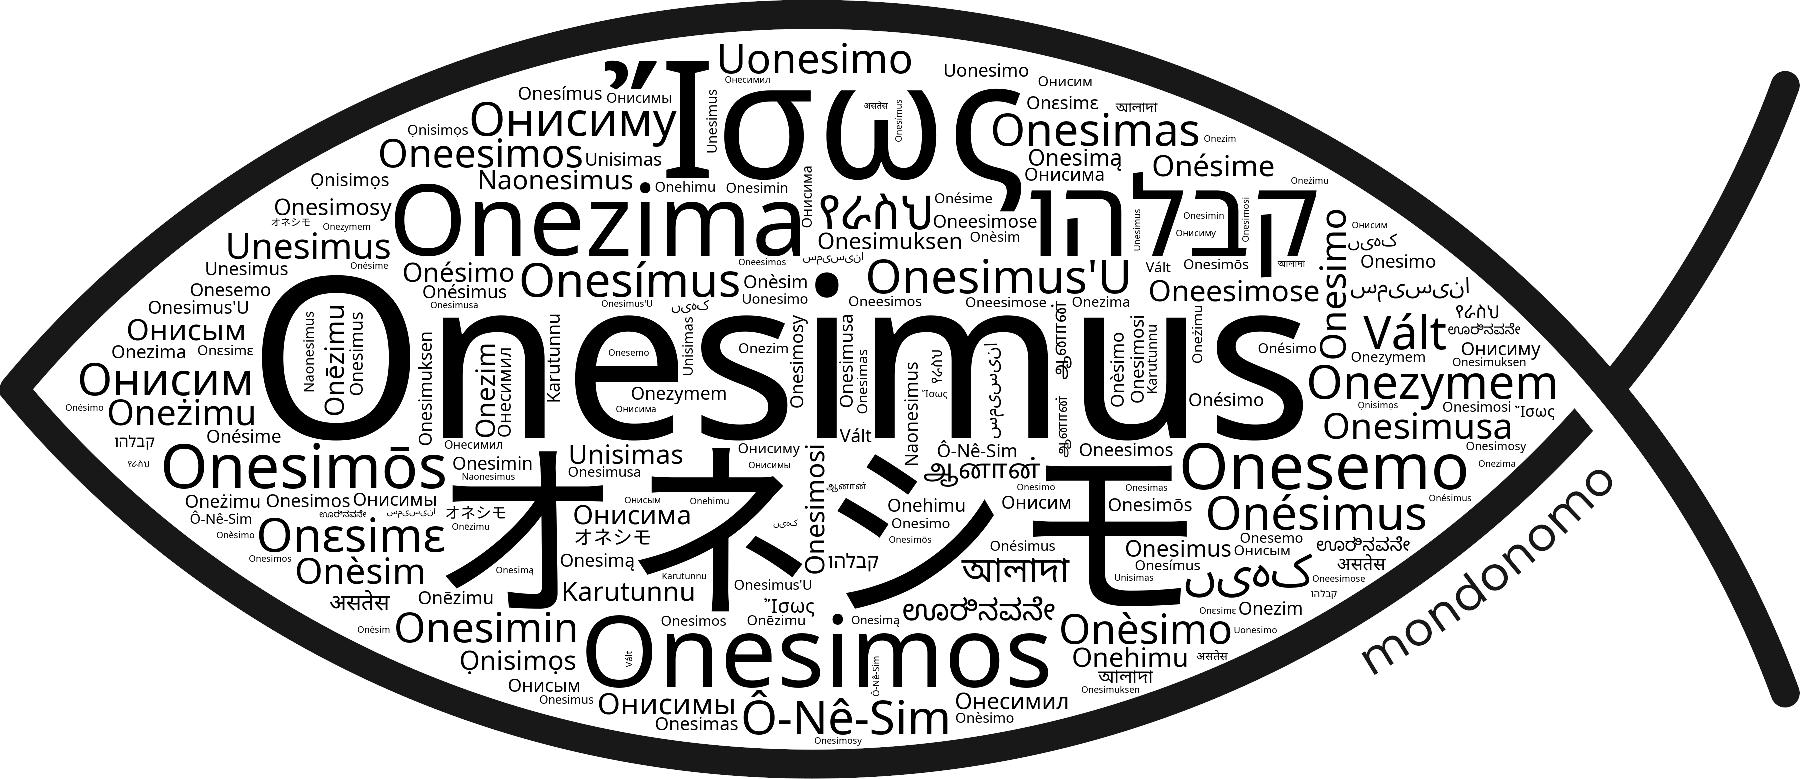 Name Onesimus in the world's Bibles